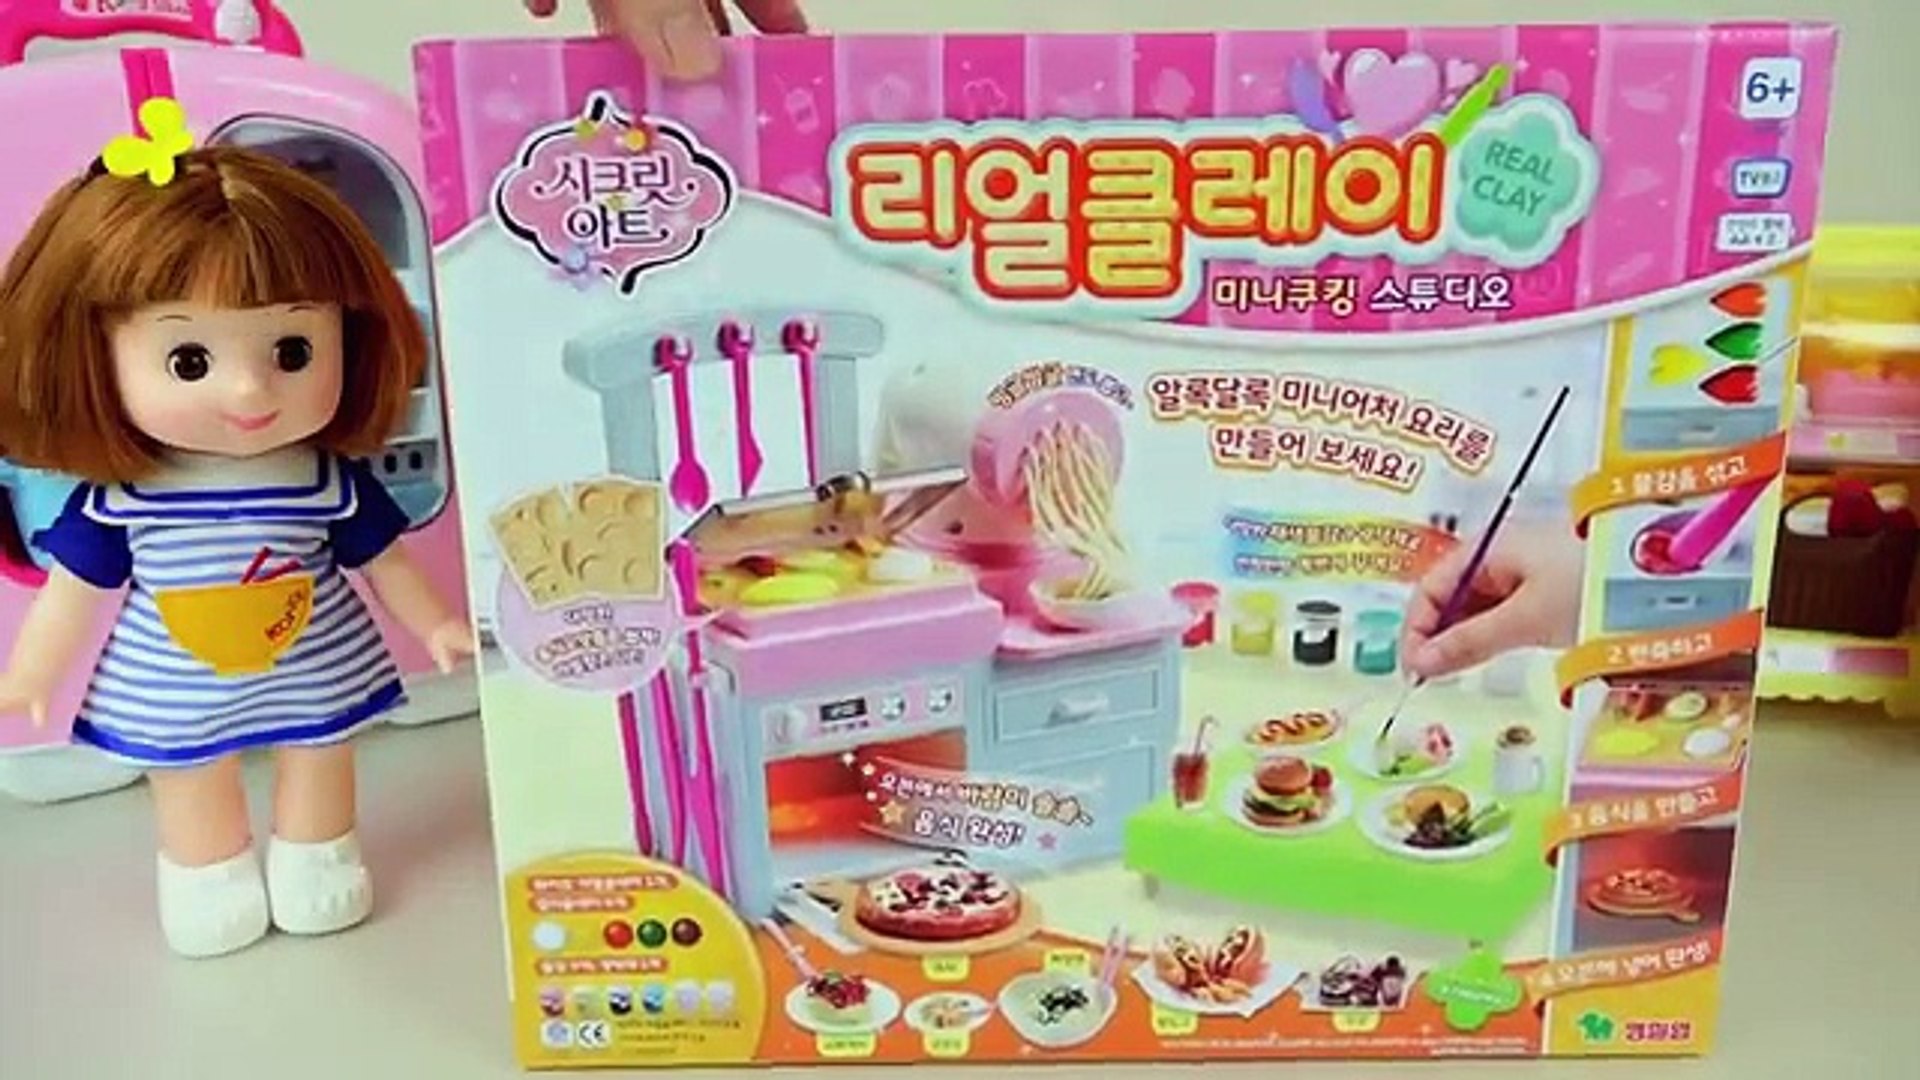 Kitchen noodle cooking Play Doh ice cream maker with Baby Doll Pororo -  Dailymotion Video